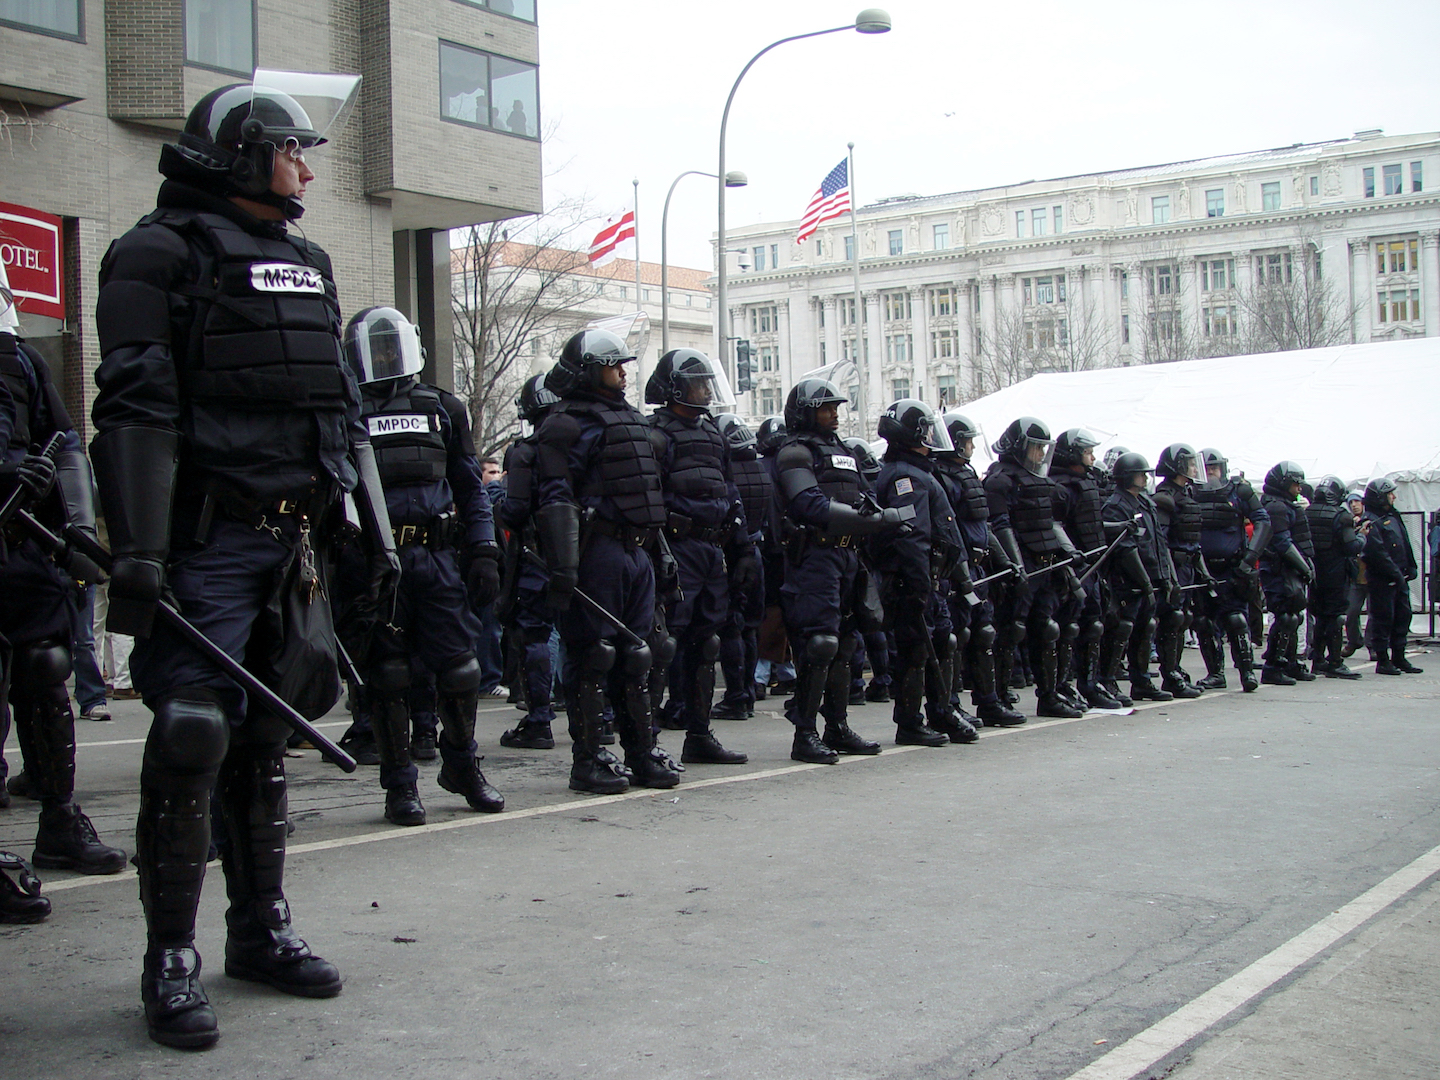 Deep-State martial law crackdown will enlist local police to enforce